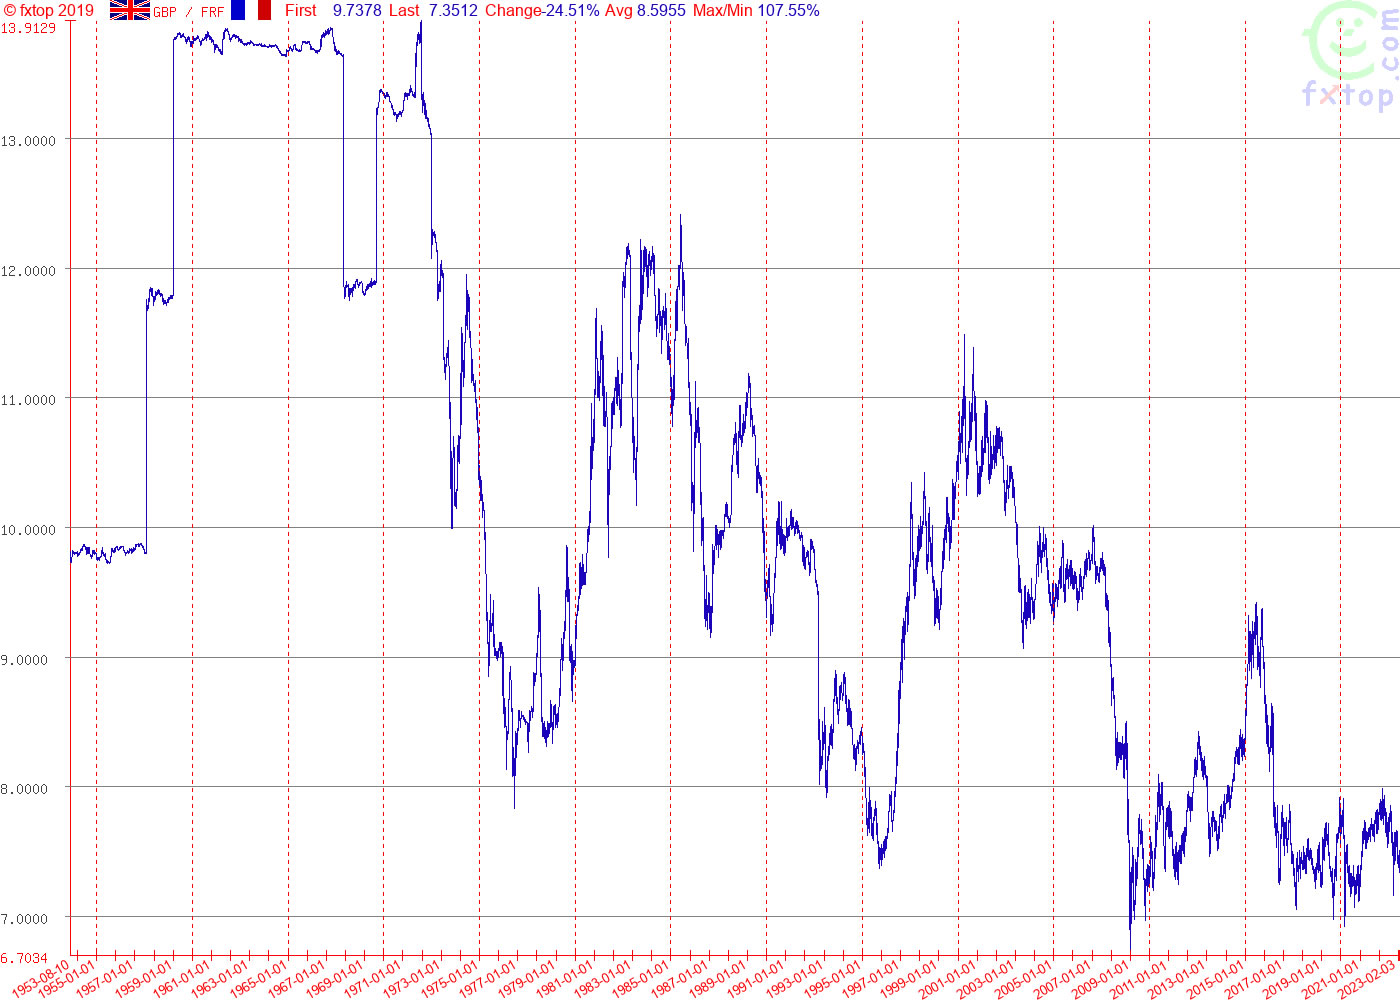 Graph of the exchange rate of the pound sterling (GBP) against the French franc (FRF) 1953-2023.